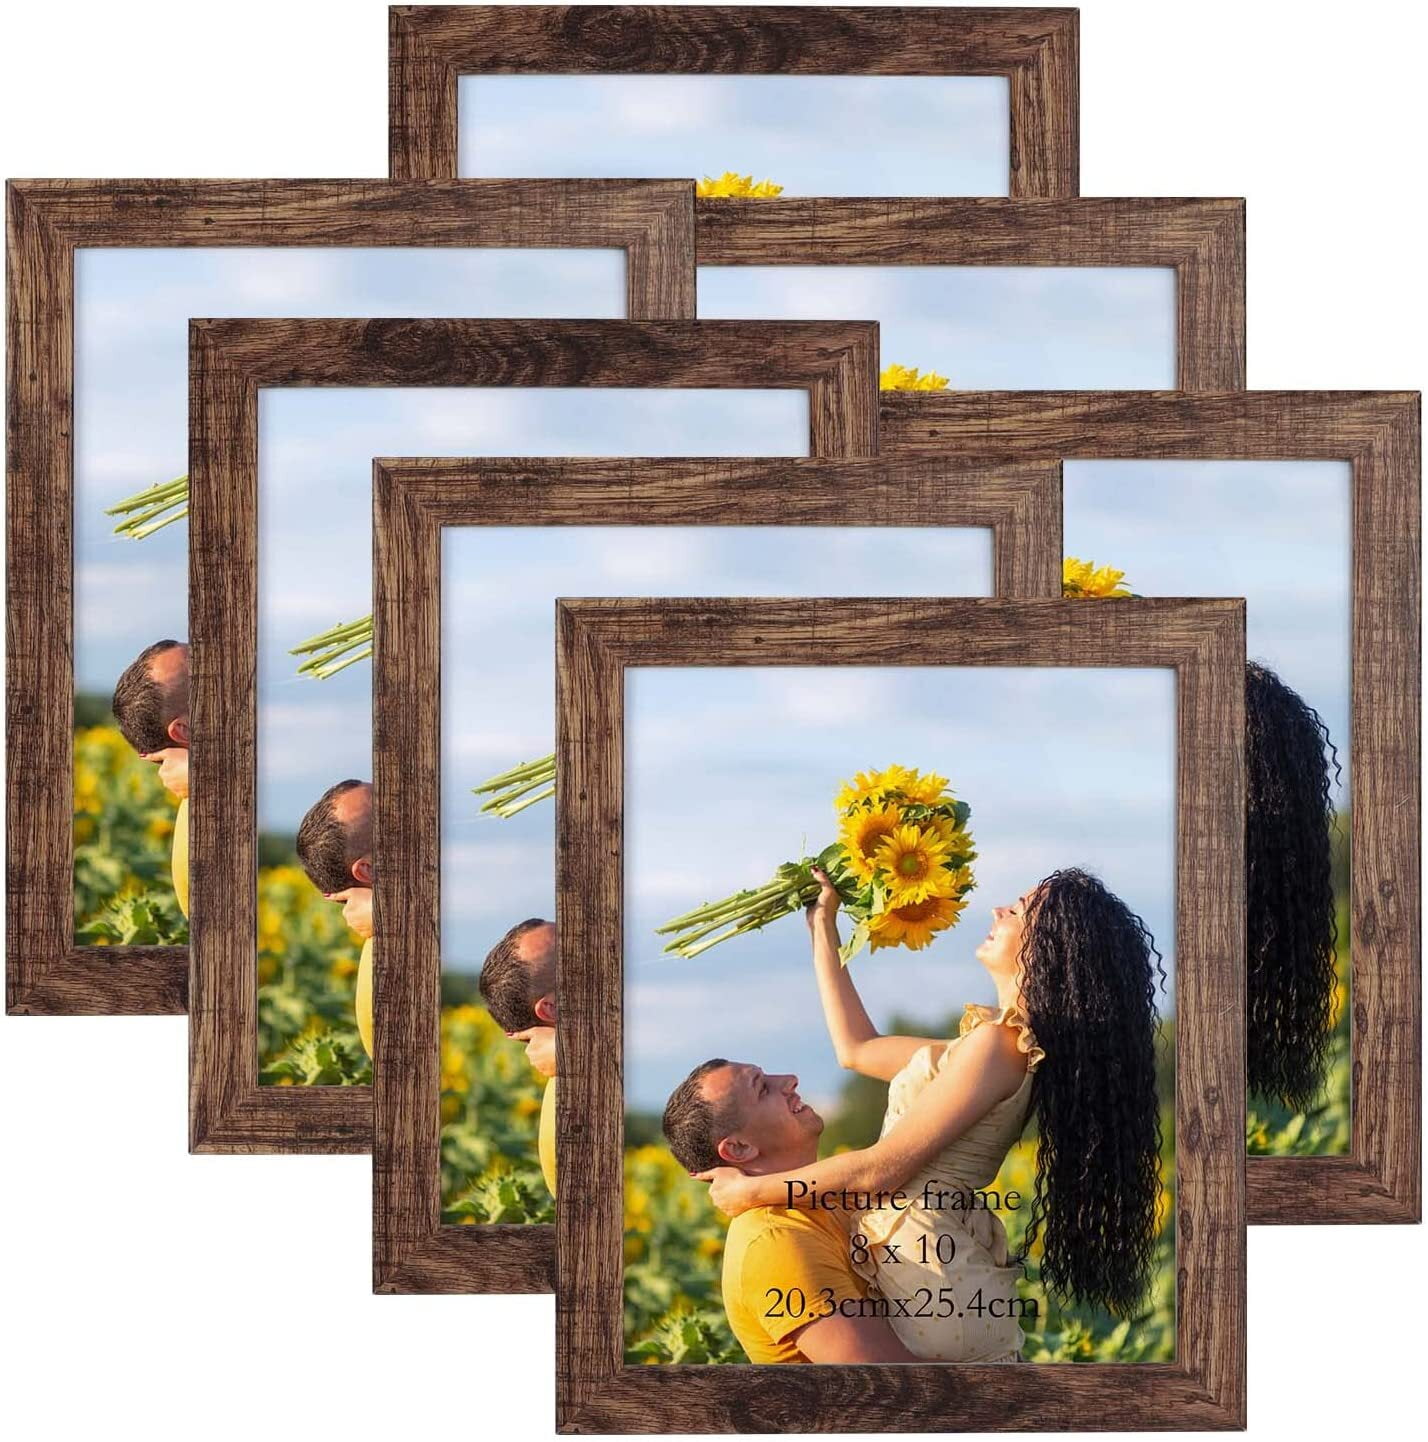 Giftgarden 4x6 Picture Frame Set of 4, 5x7 Frames Matted to 4 by 6 Pictures  with Mat or 5 by 7 Photos without Mat, Wall Hanging or Tabletop Display